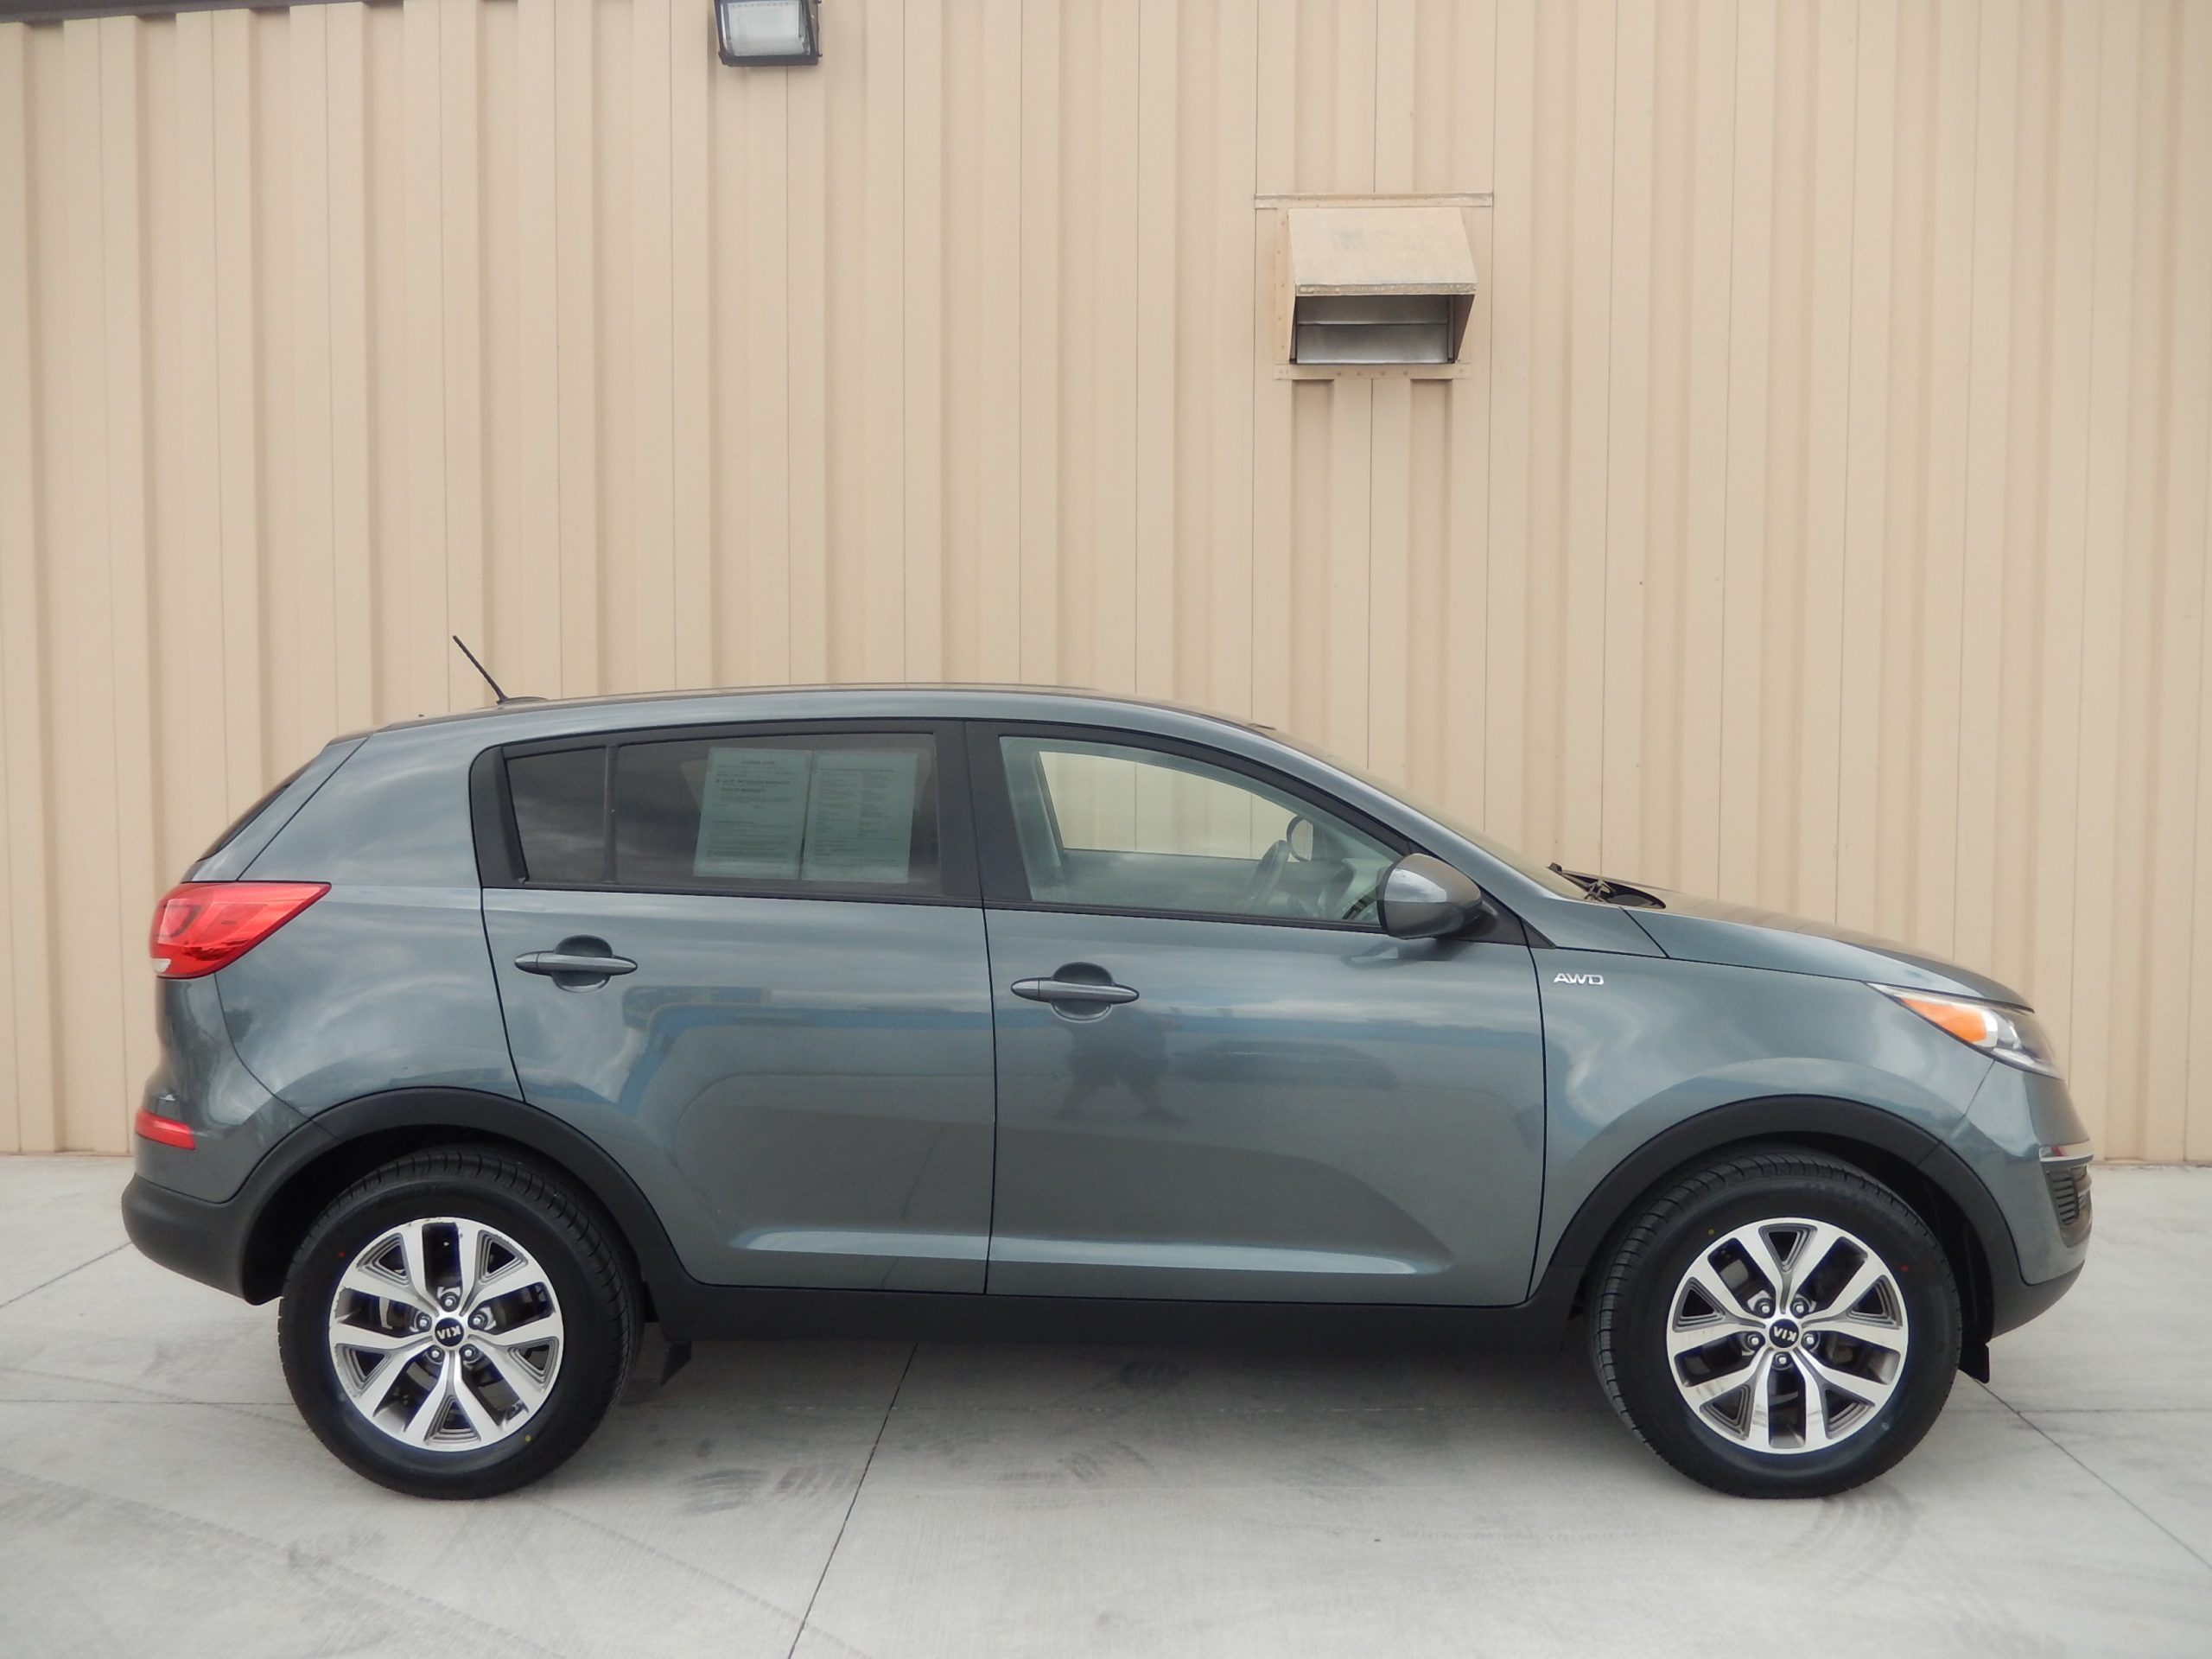 Used 2015 Kia Sportage LX SUv for sale in 